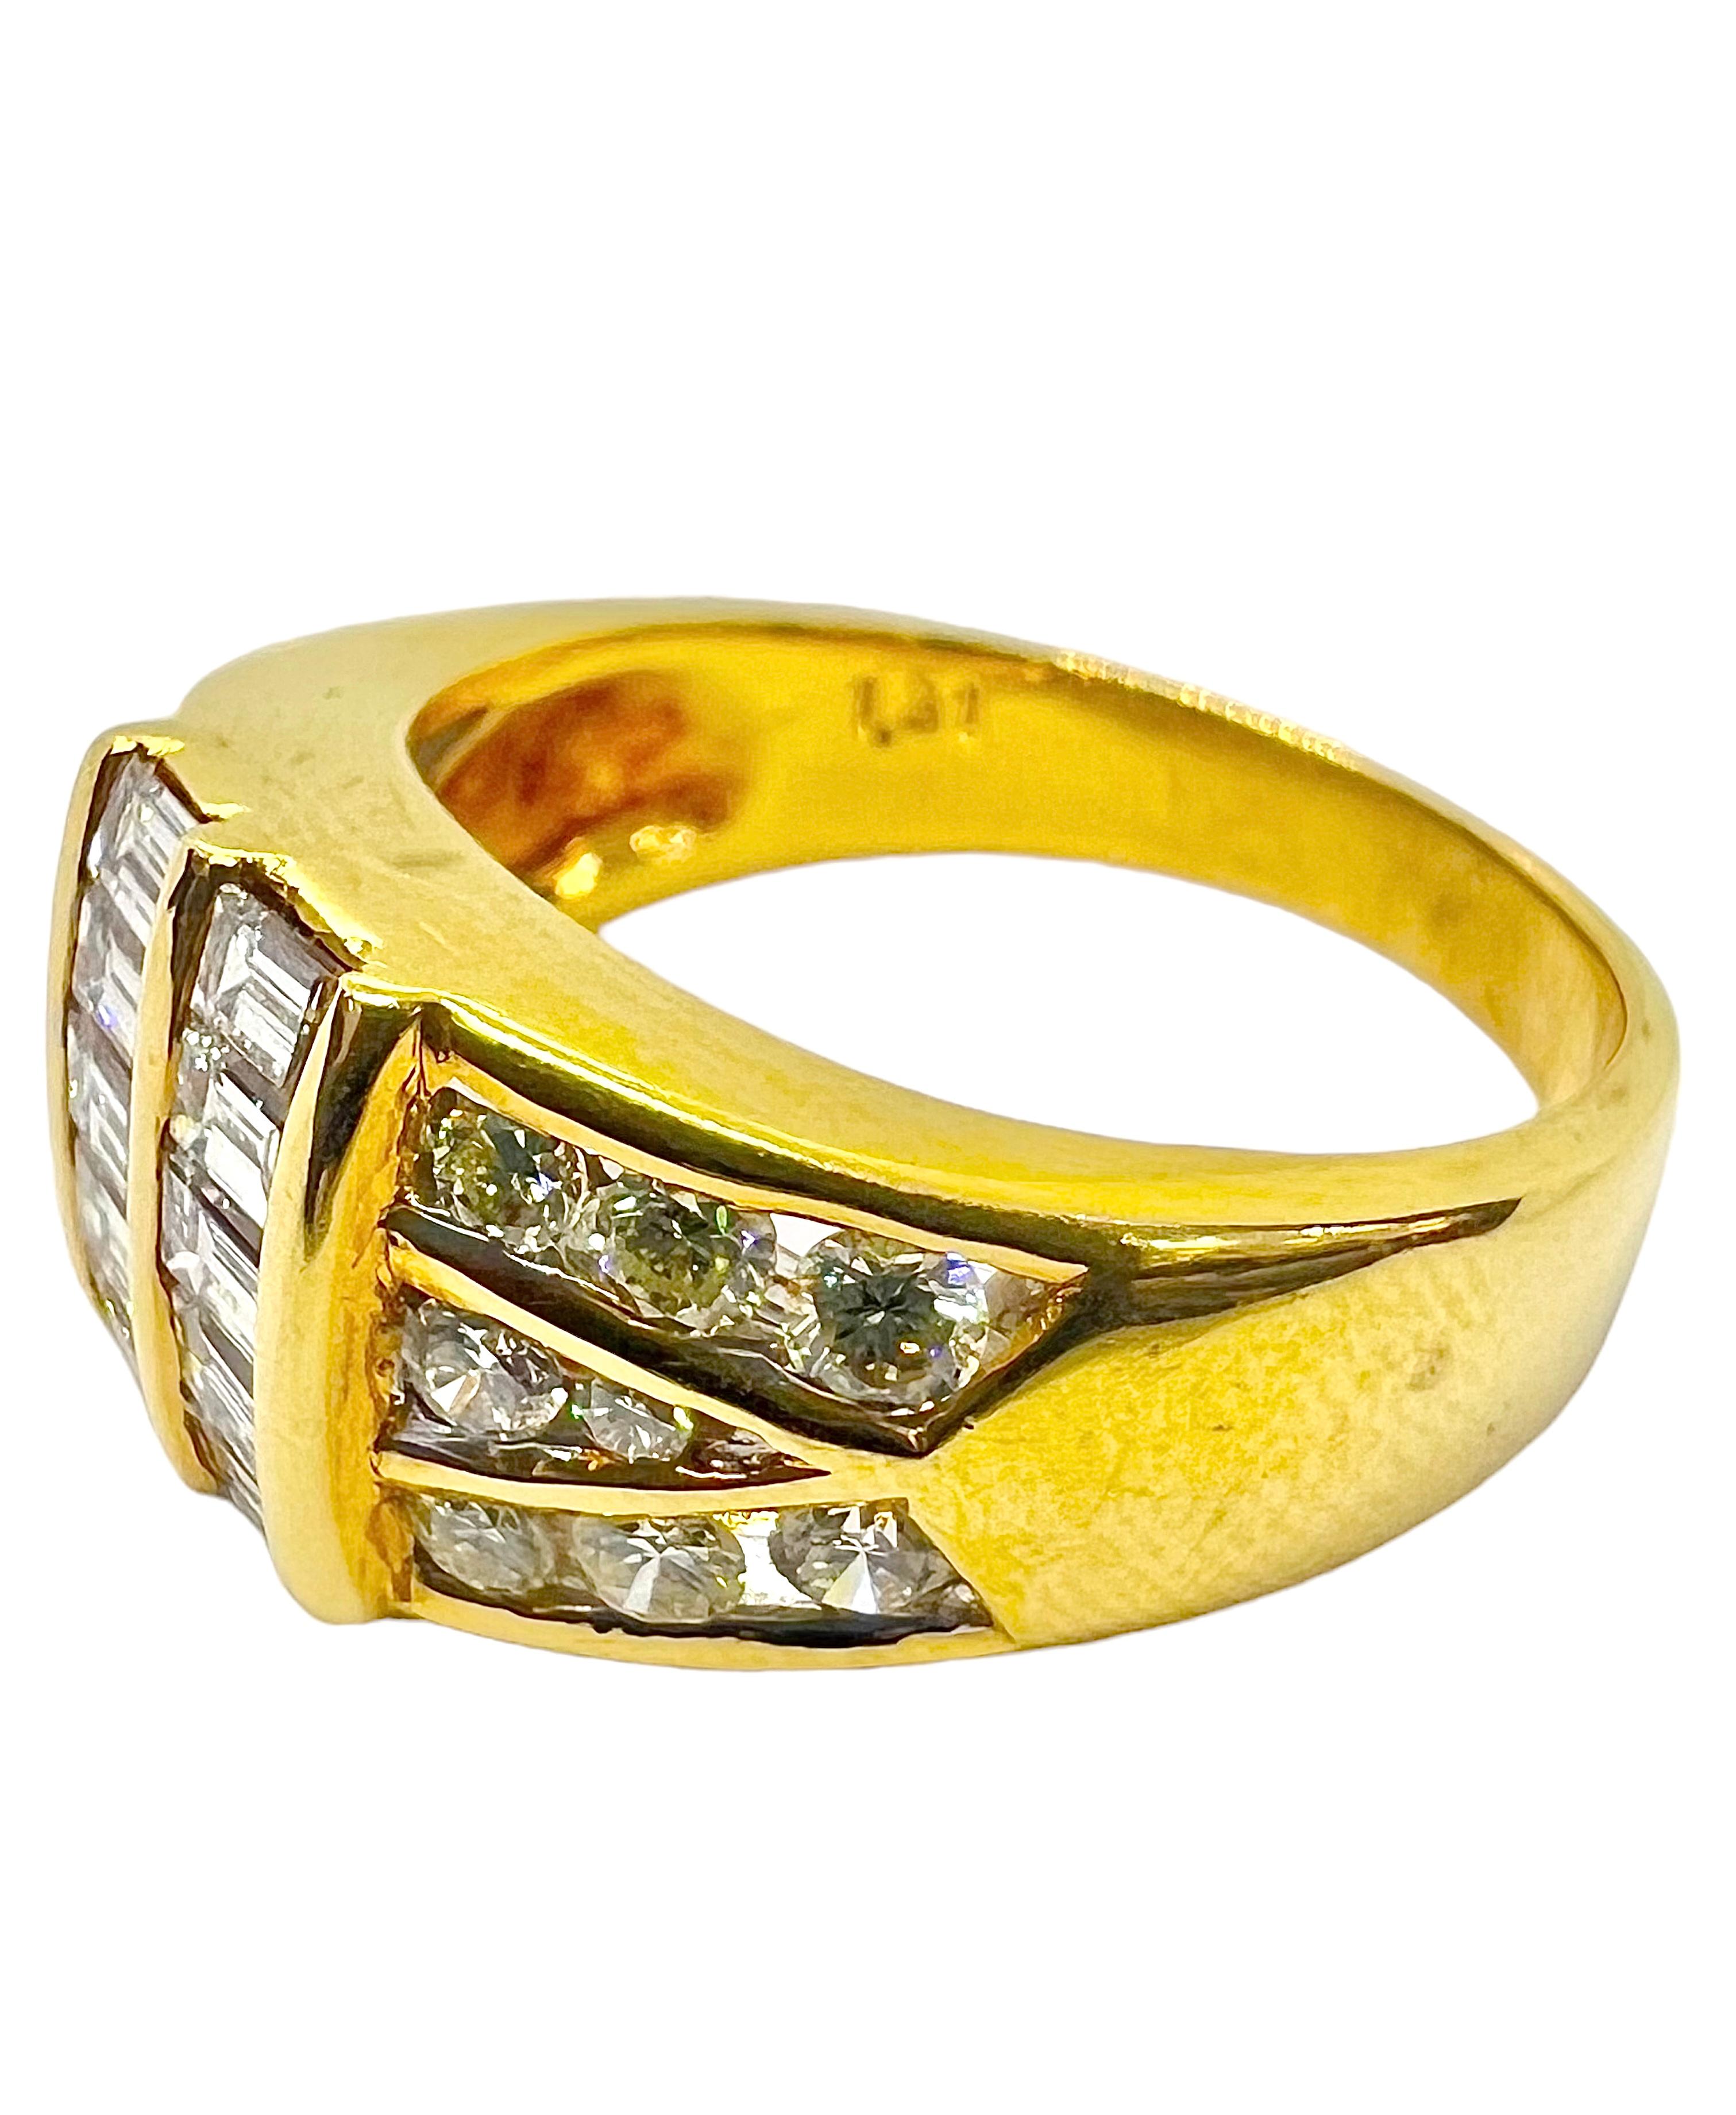 18K yellow gold ring with emerald cut and round diamonds.

Sophia D by Joseph Dardashti LTD has been known worldwide for 35 years and are inspired by classic Art Deco design that merges with modern manufacturing techniques. 